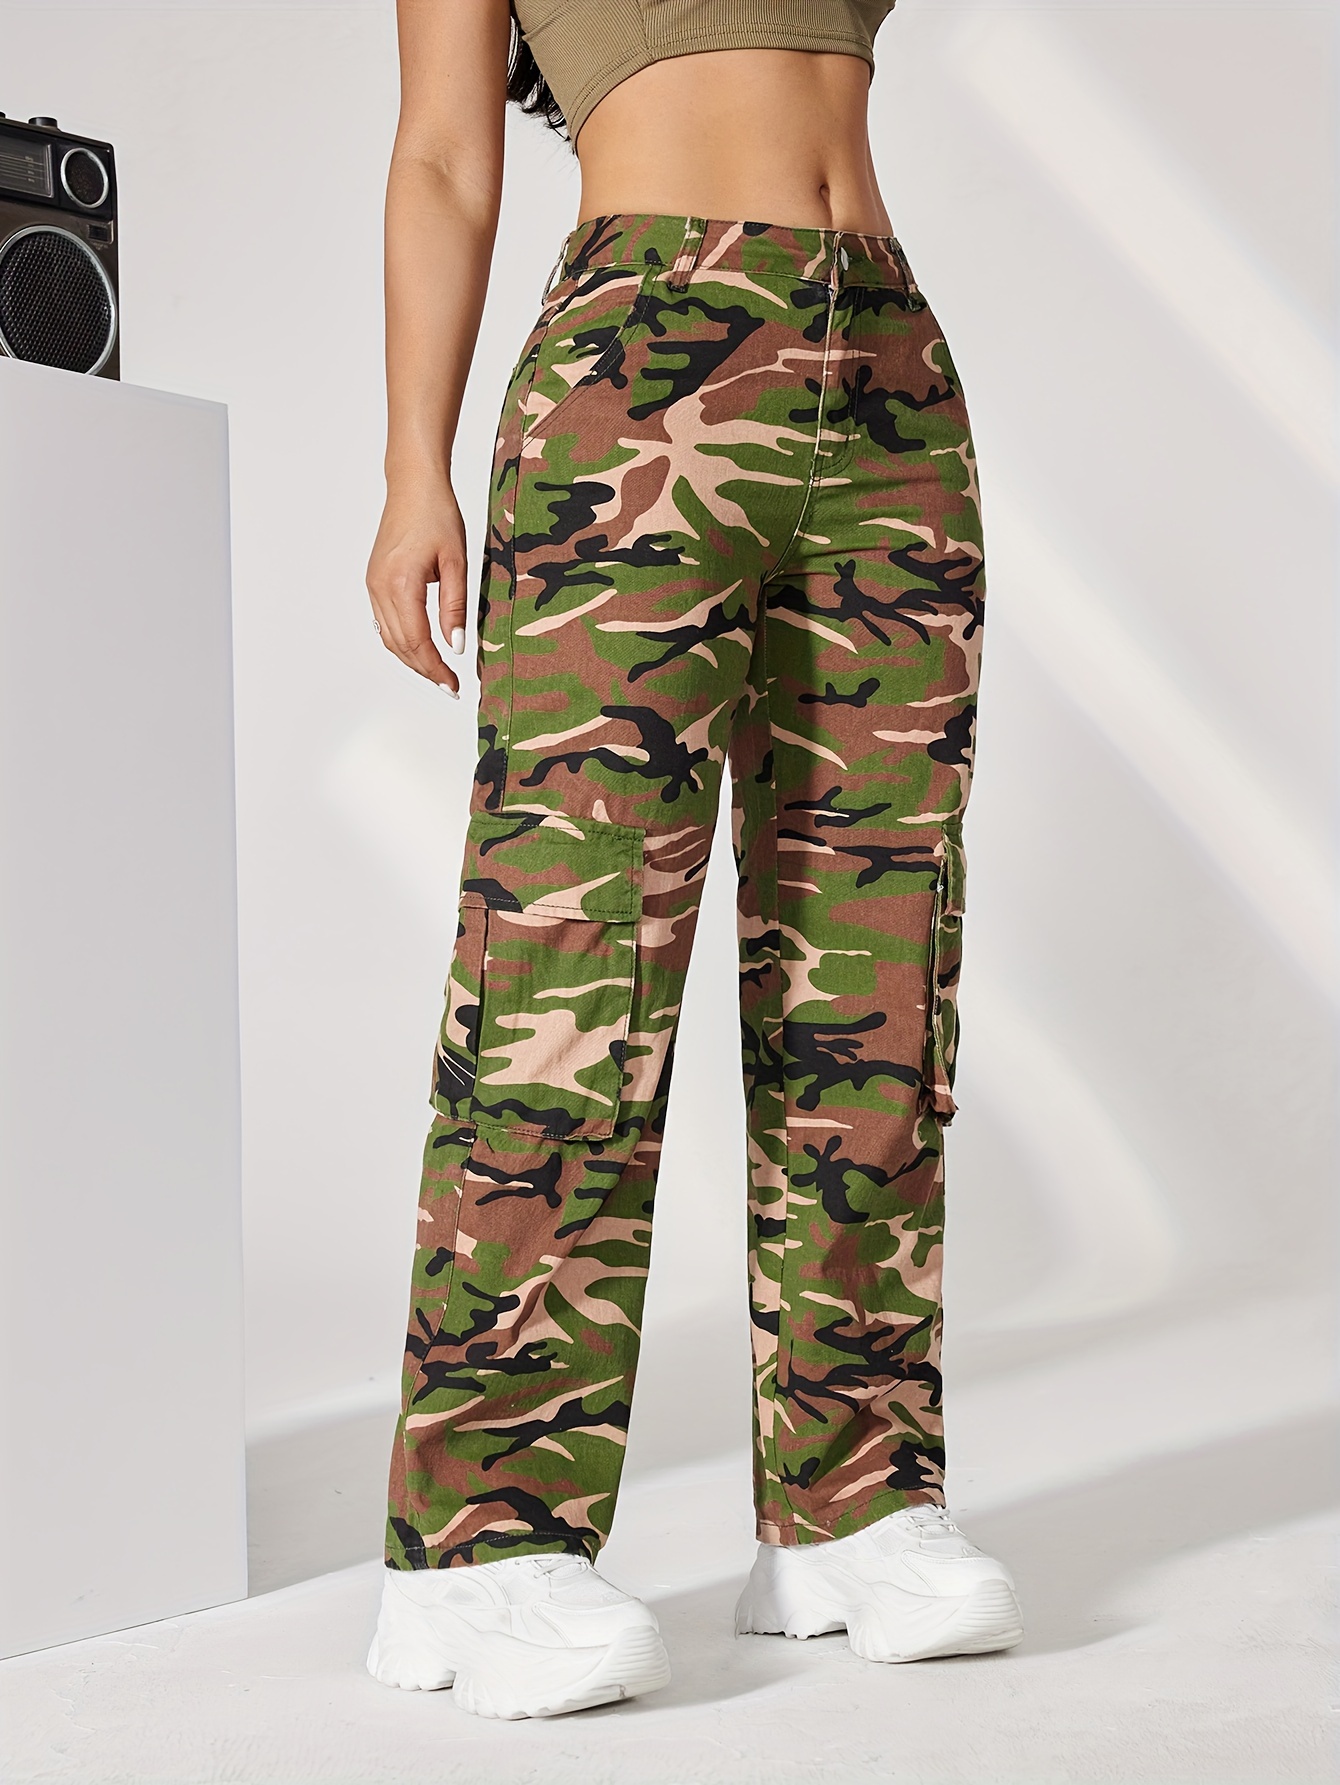 Camo High Waist Straight Jeans, Flap Pockets Loose Fit Chic Cargo Pants,  Women's Denim Jeans & Clothing